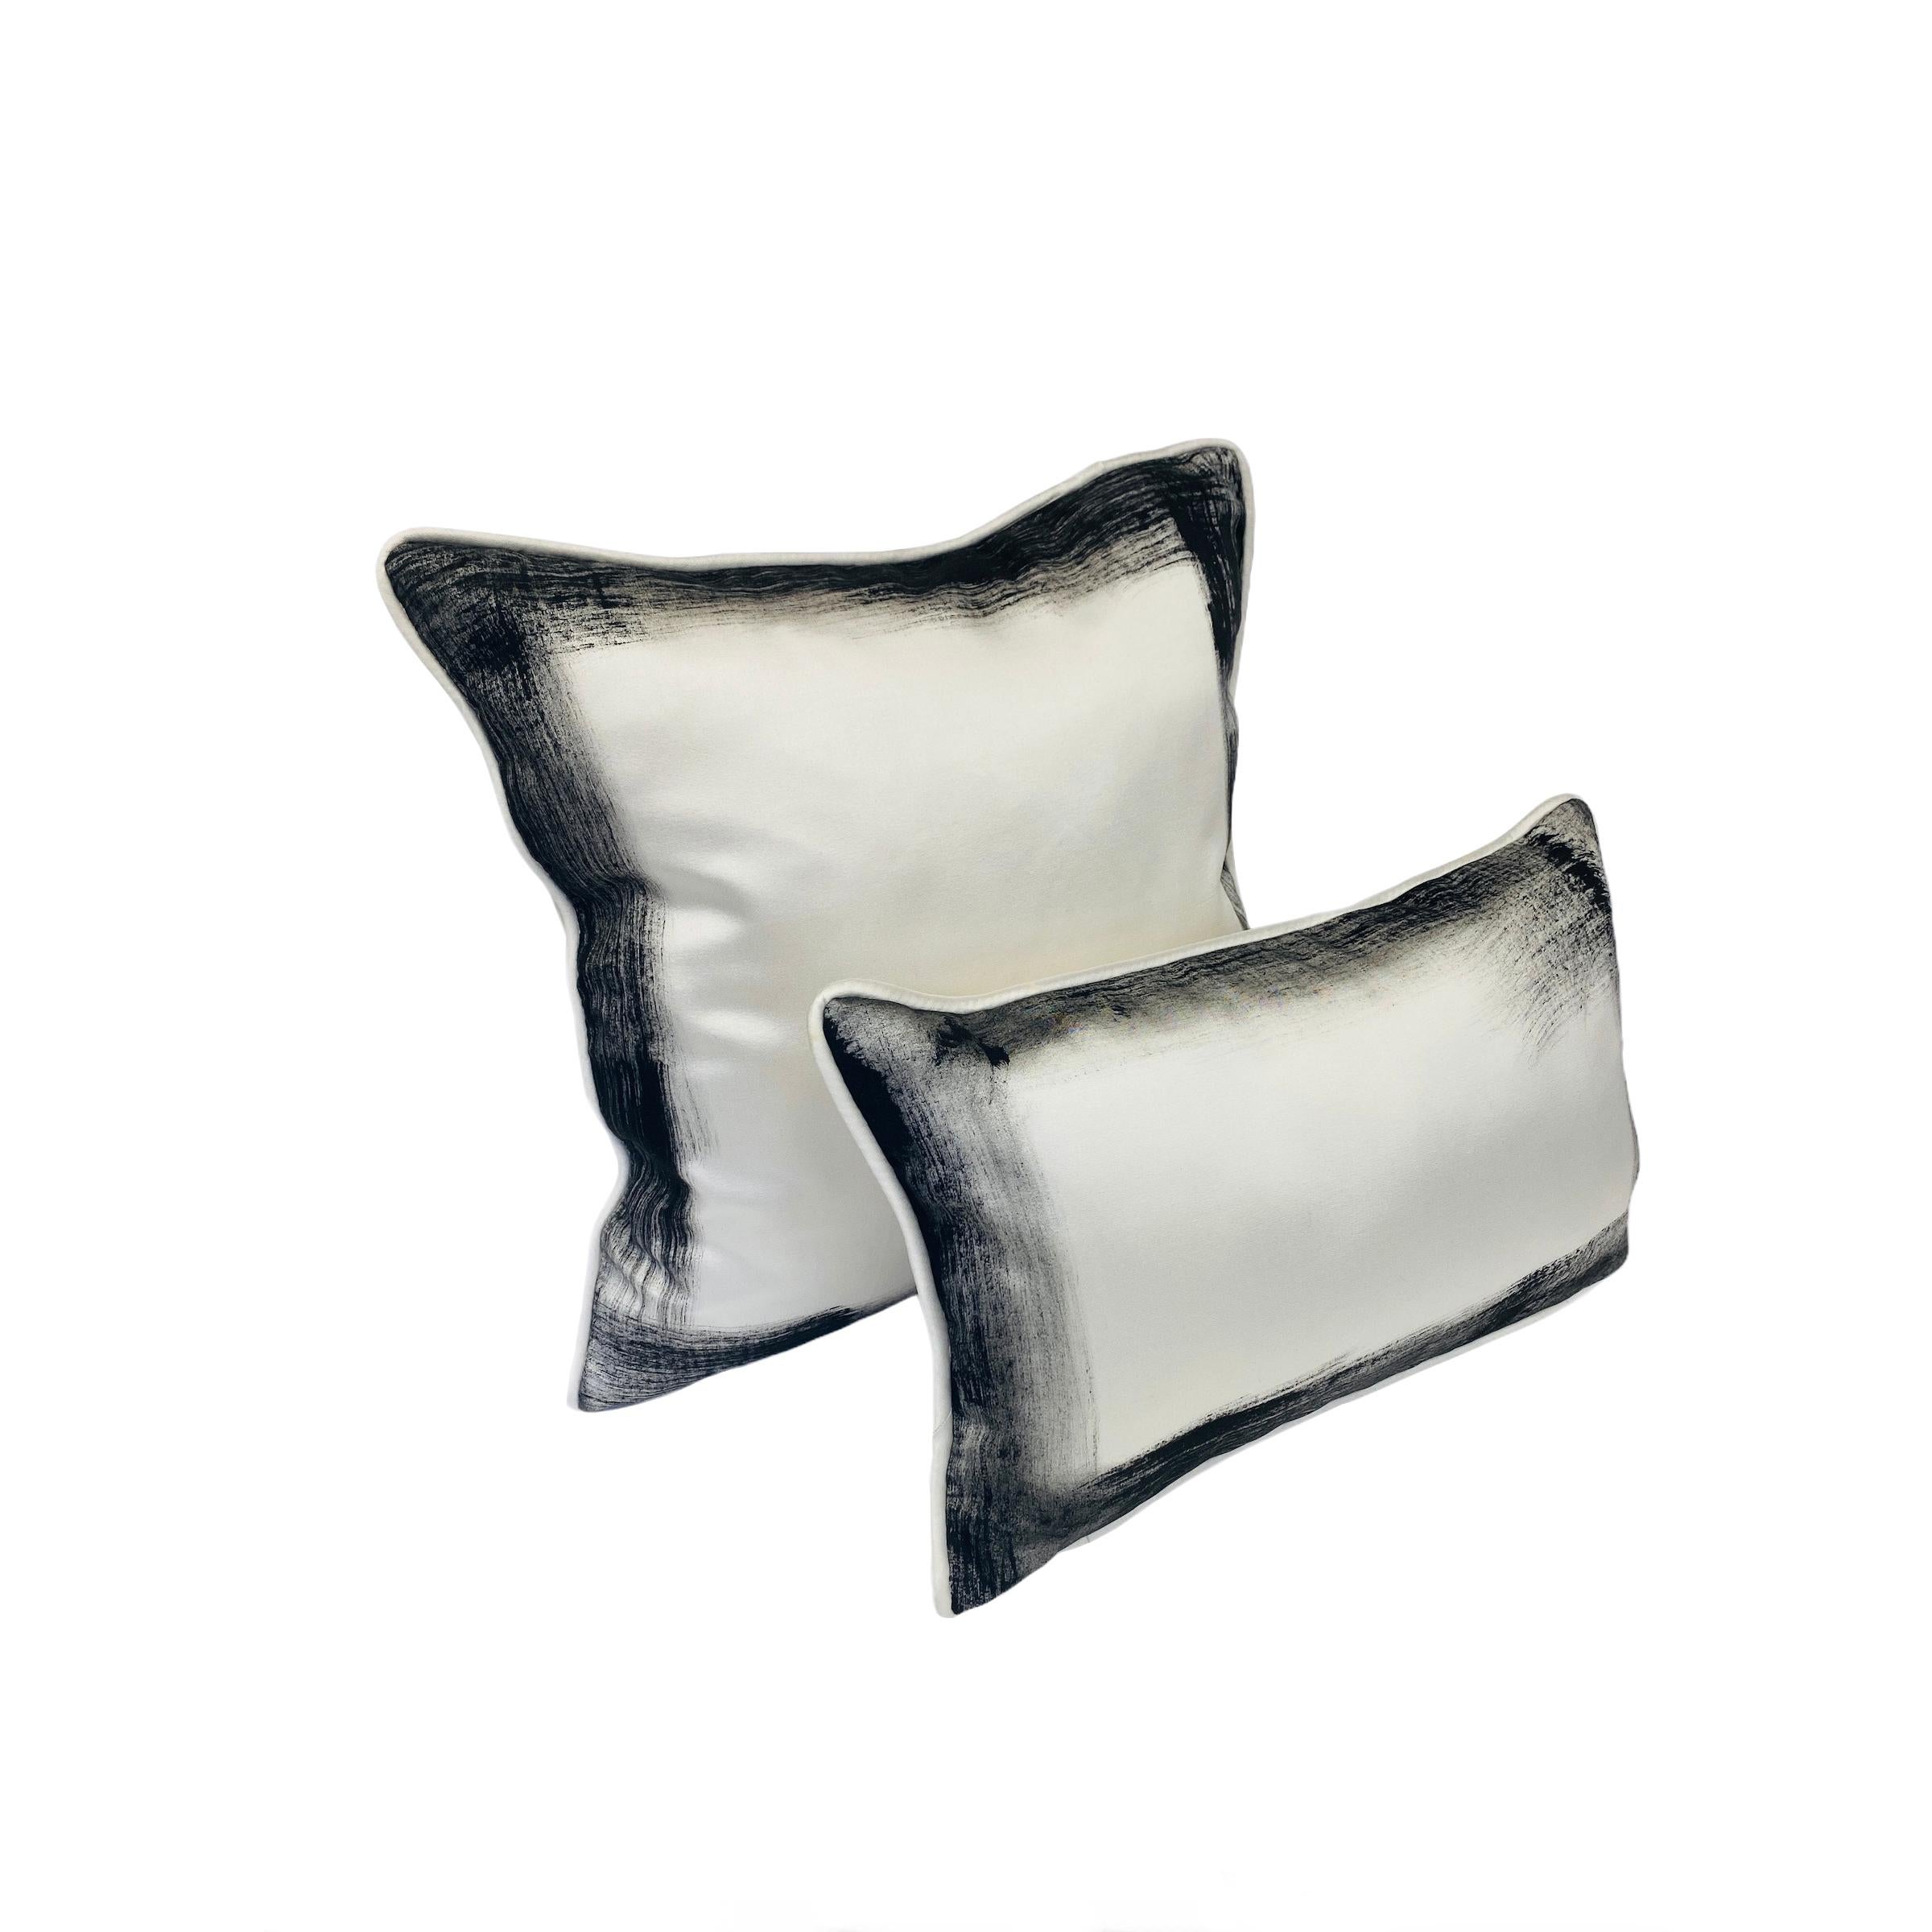 Authentic Italian silk wool in off white. The luxury fabric is a blend of Italian virgin wool and silk, which makes for greater durability. This gives a perfect softness and sheen to the pillows, complementing any interior decor. The wool